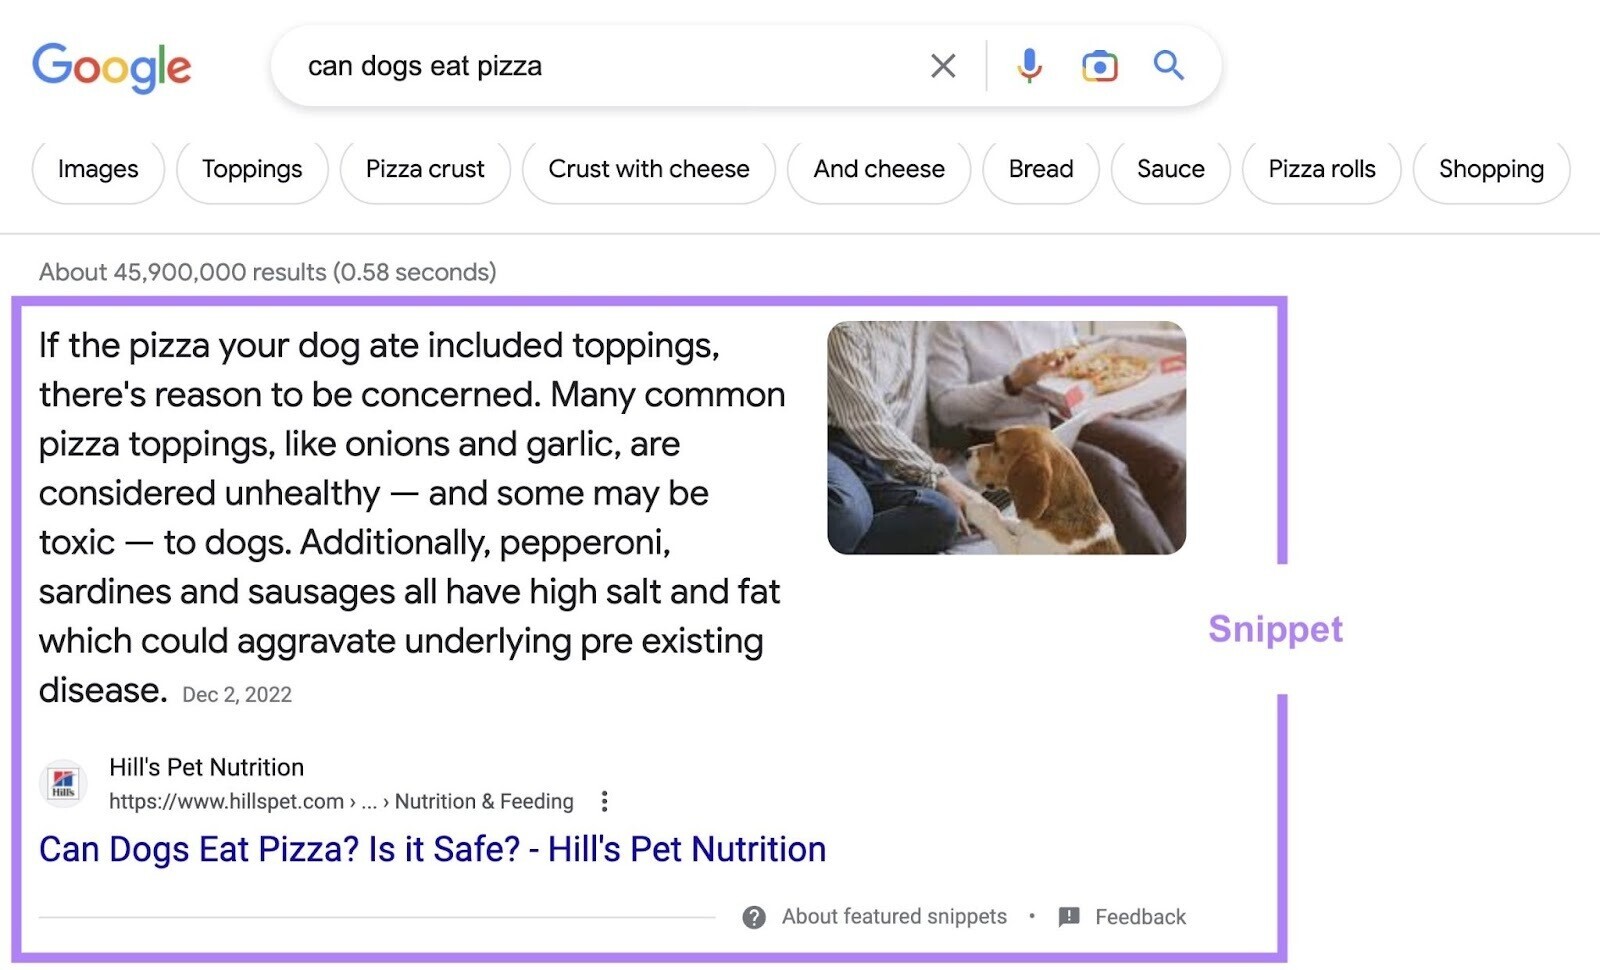 Google snippet from Hill’s Pet Nutrition article on "Can Dogs Eat Pizza? Is it Safe?"